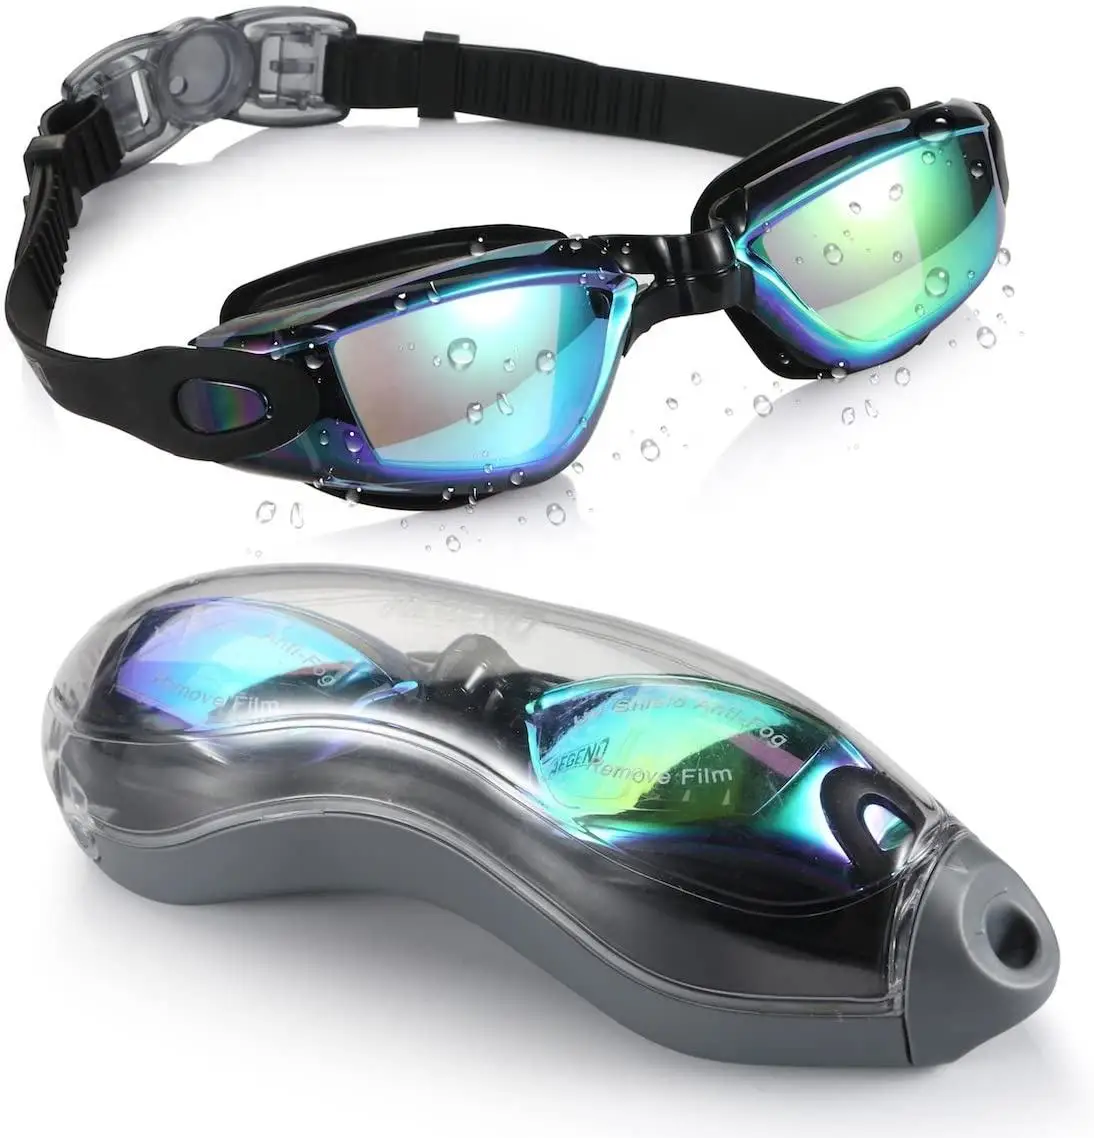 Hot Sale Swim Goggles, Swimming Goggles No Leaking Anti Fog UV Protection Triathlon Swim Glasses with Protection Case no leaking water sports kids gifts waterproof kids swimming glasses children swimming goggles swim eyewear with earplugs